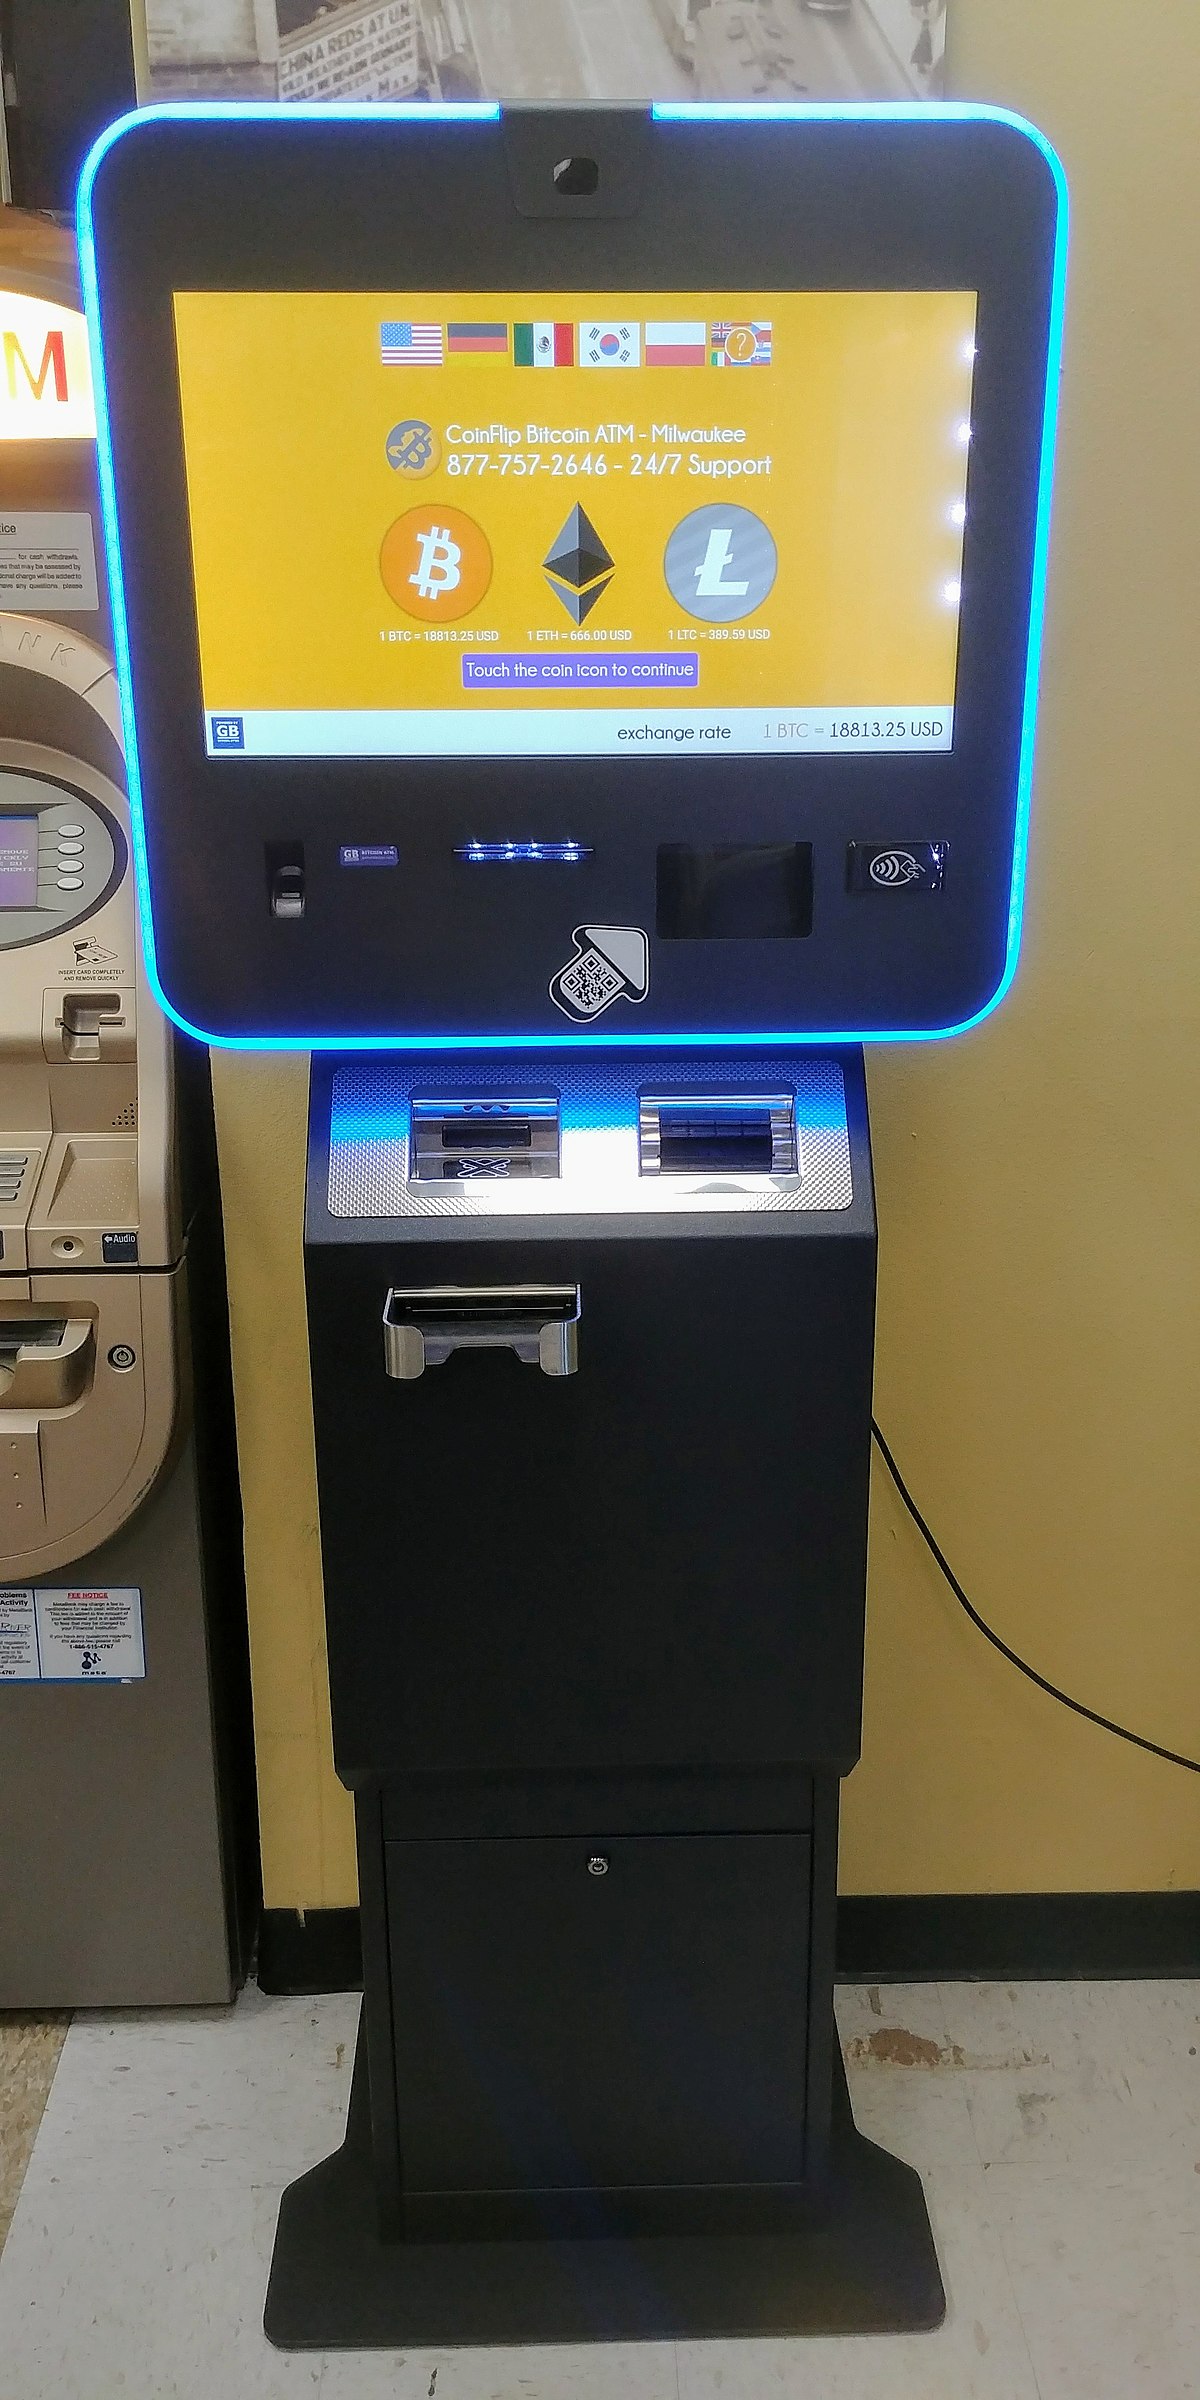 Coinflip Buy Sell Bitcoin ATM, S Michigan Ave, Chicago, IL - MapQuest